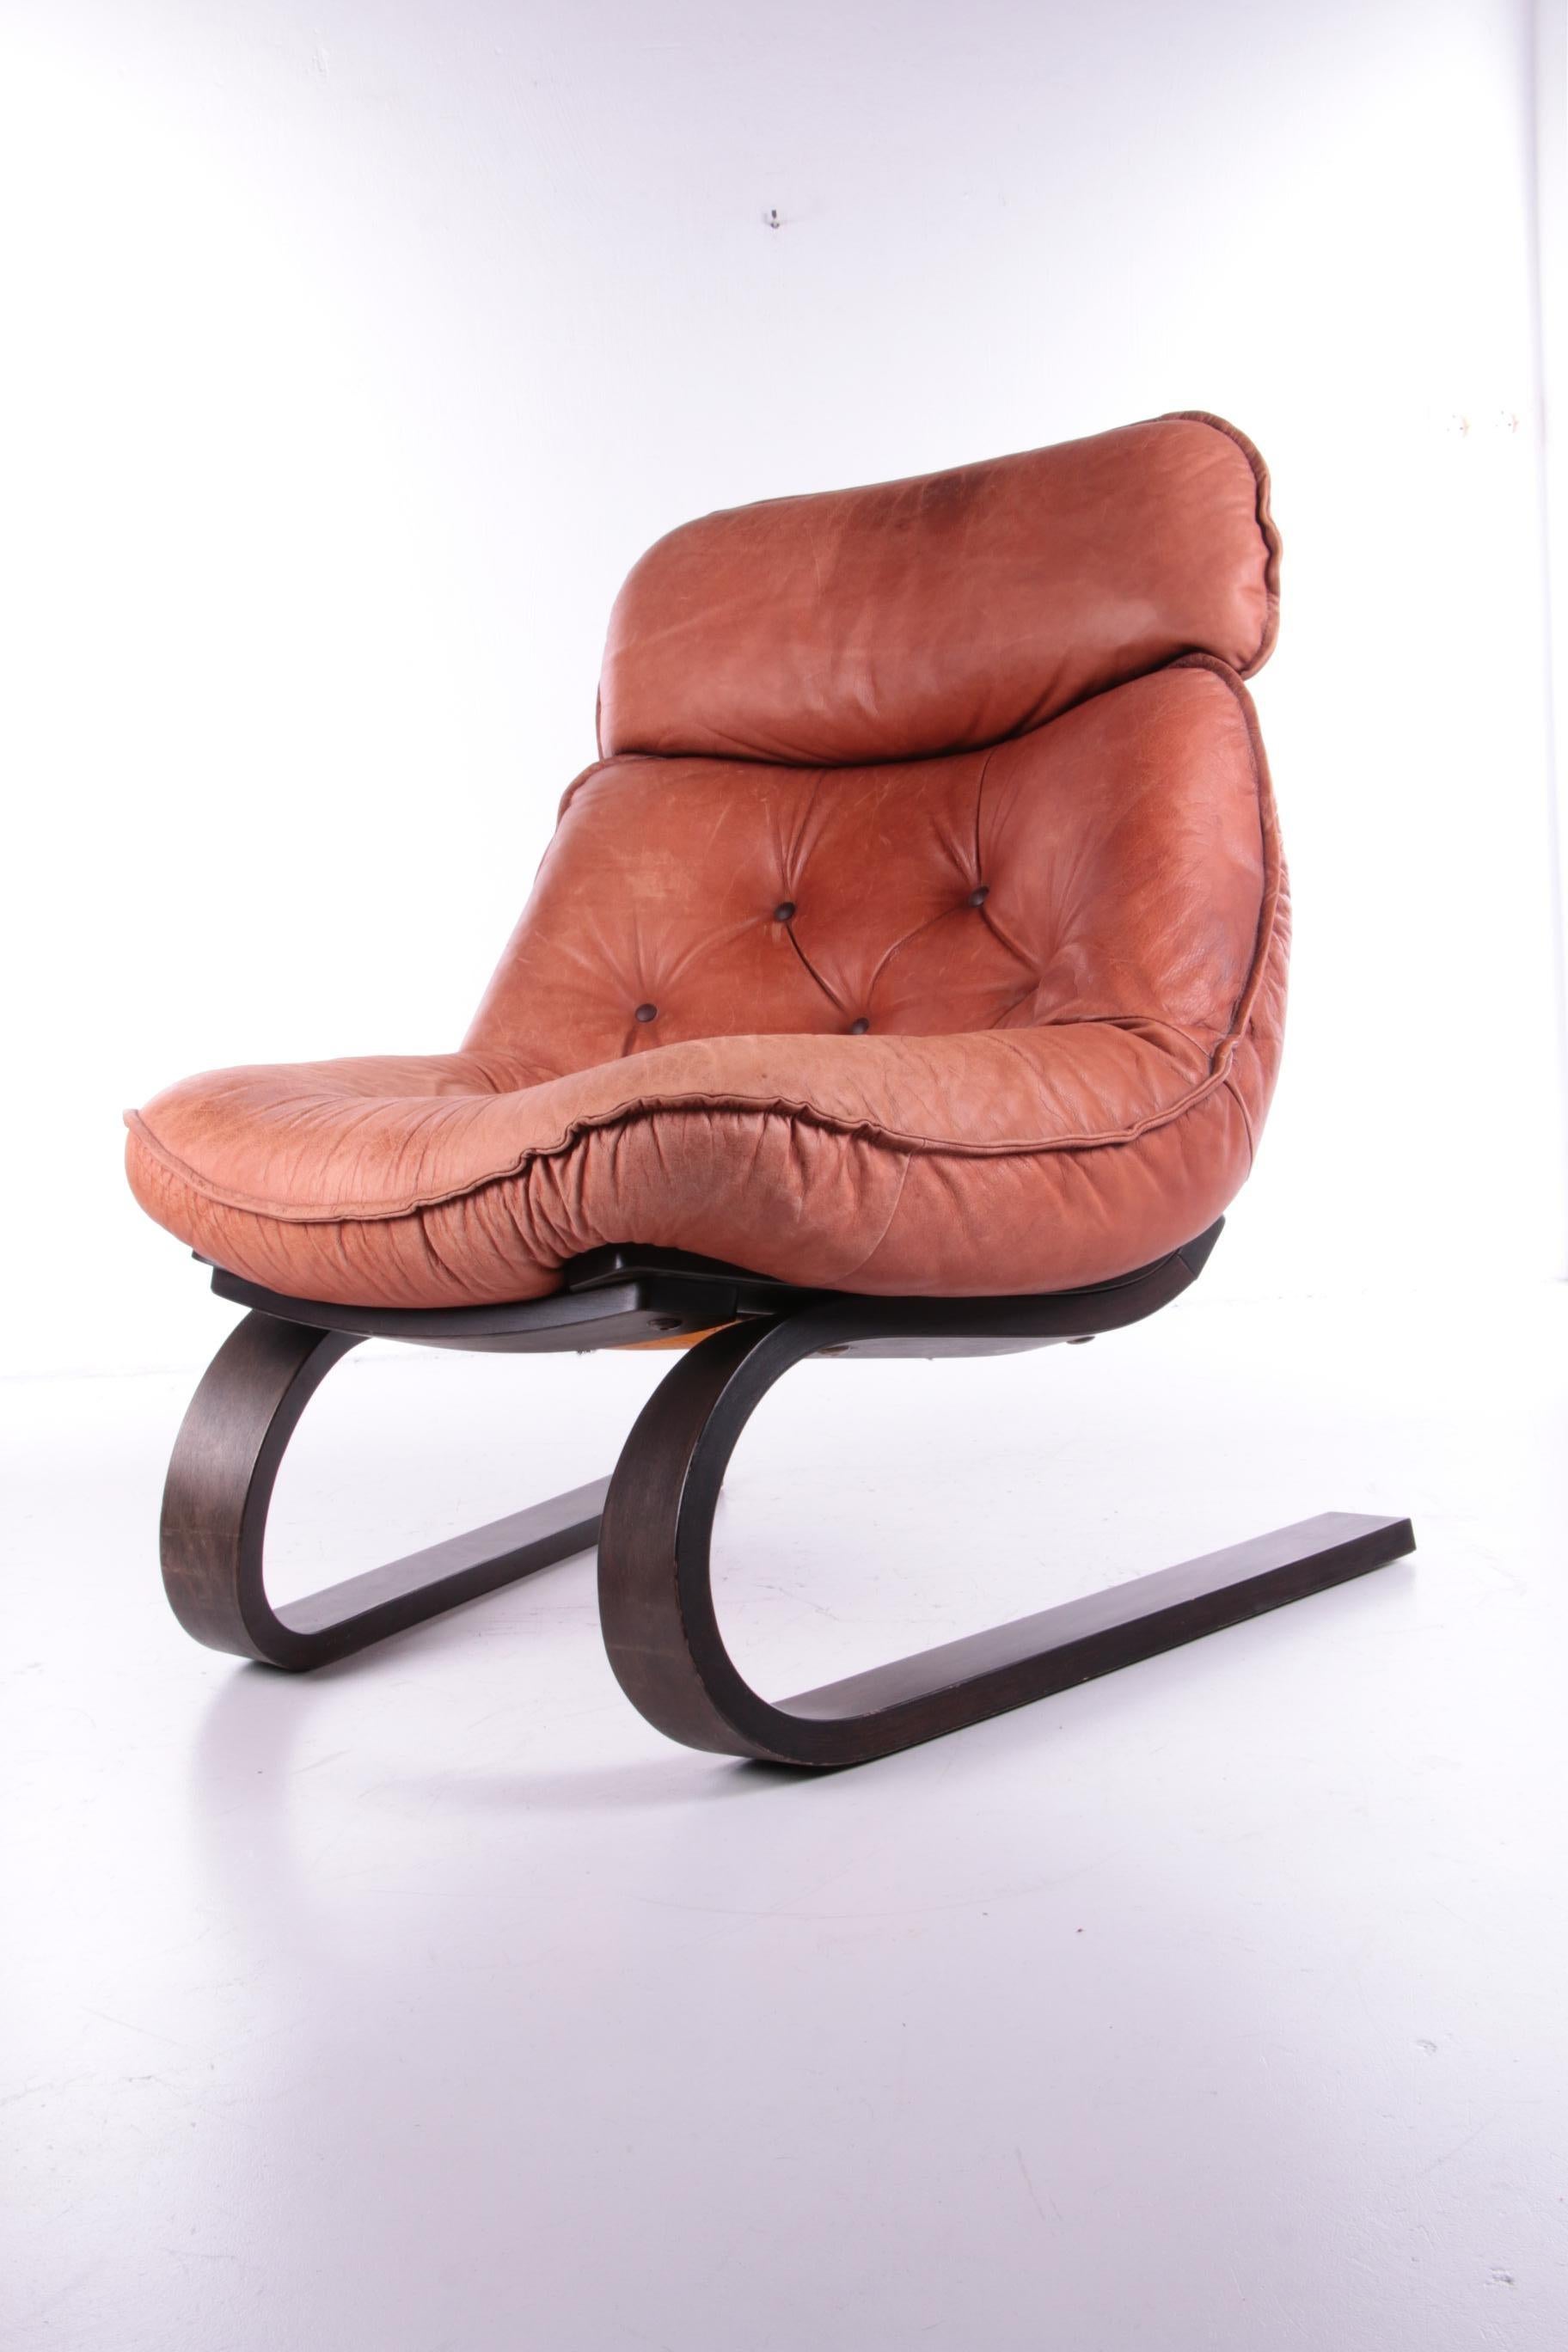 Late 20th Century Vintage Brazilian Armchair with Cognac Color Leather Seat Cushion, 70s For Sale